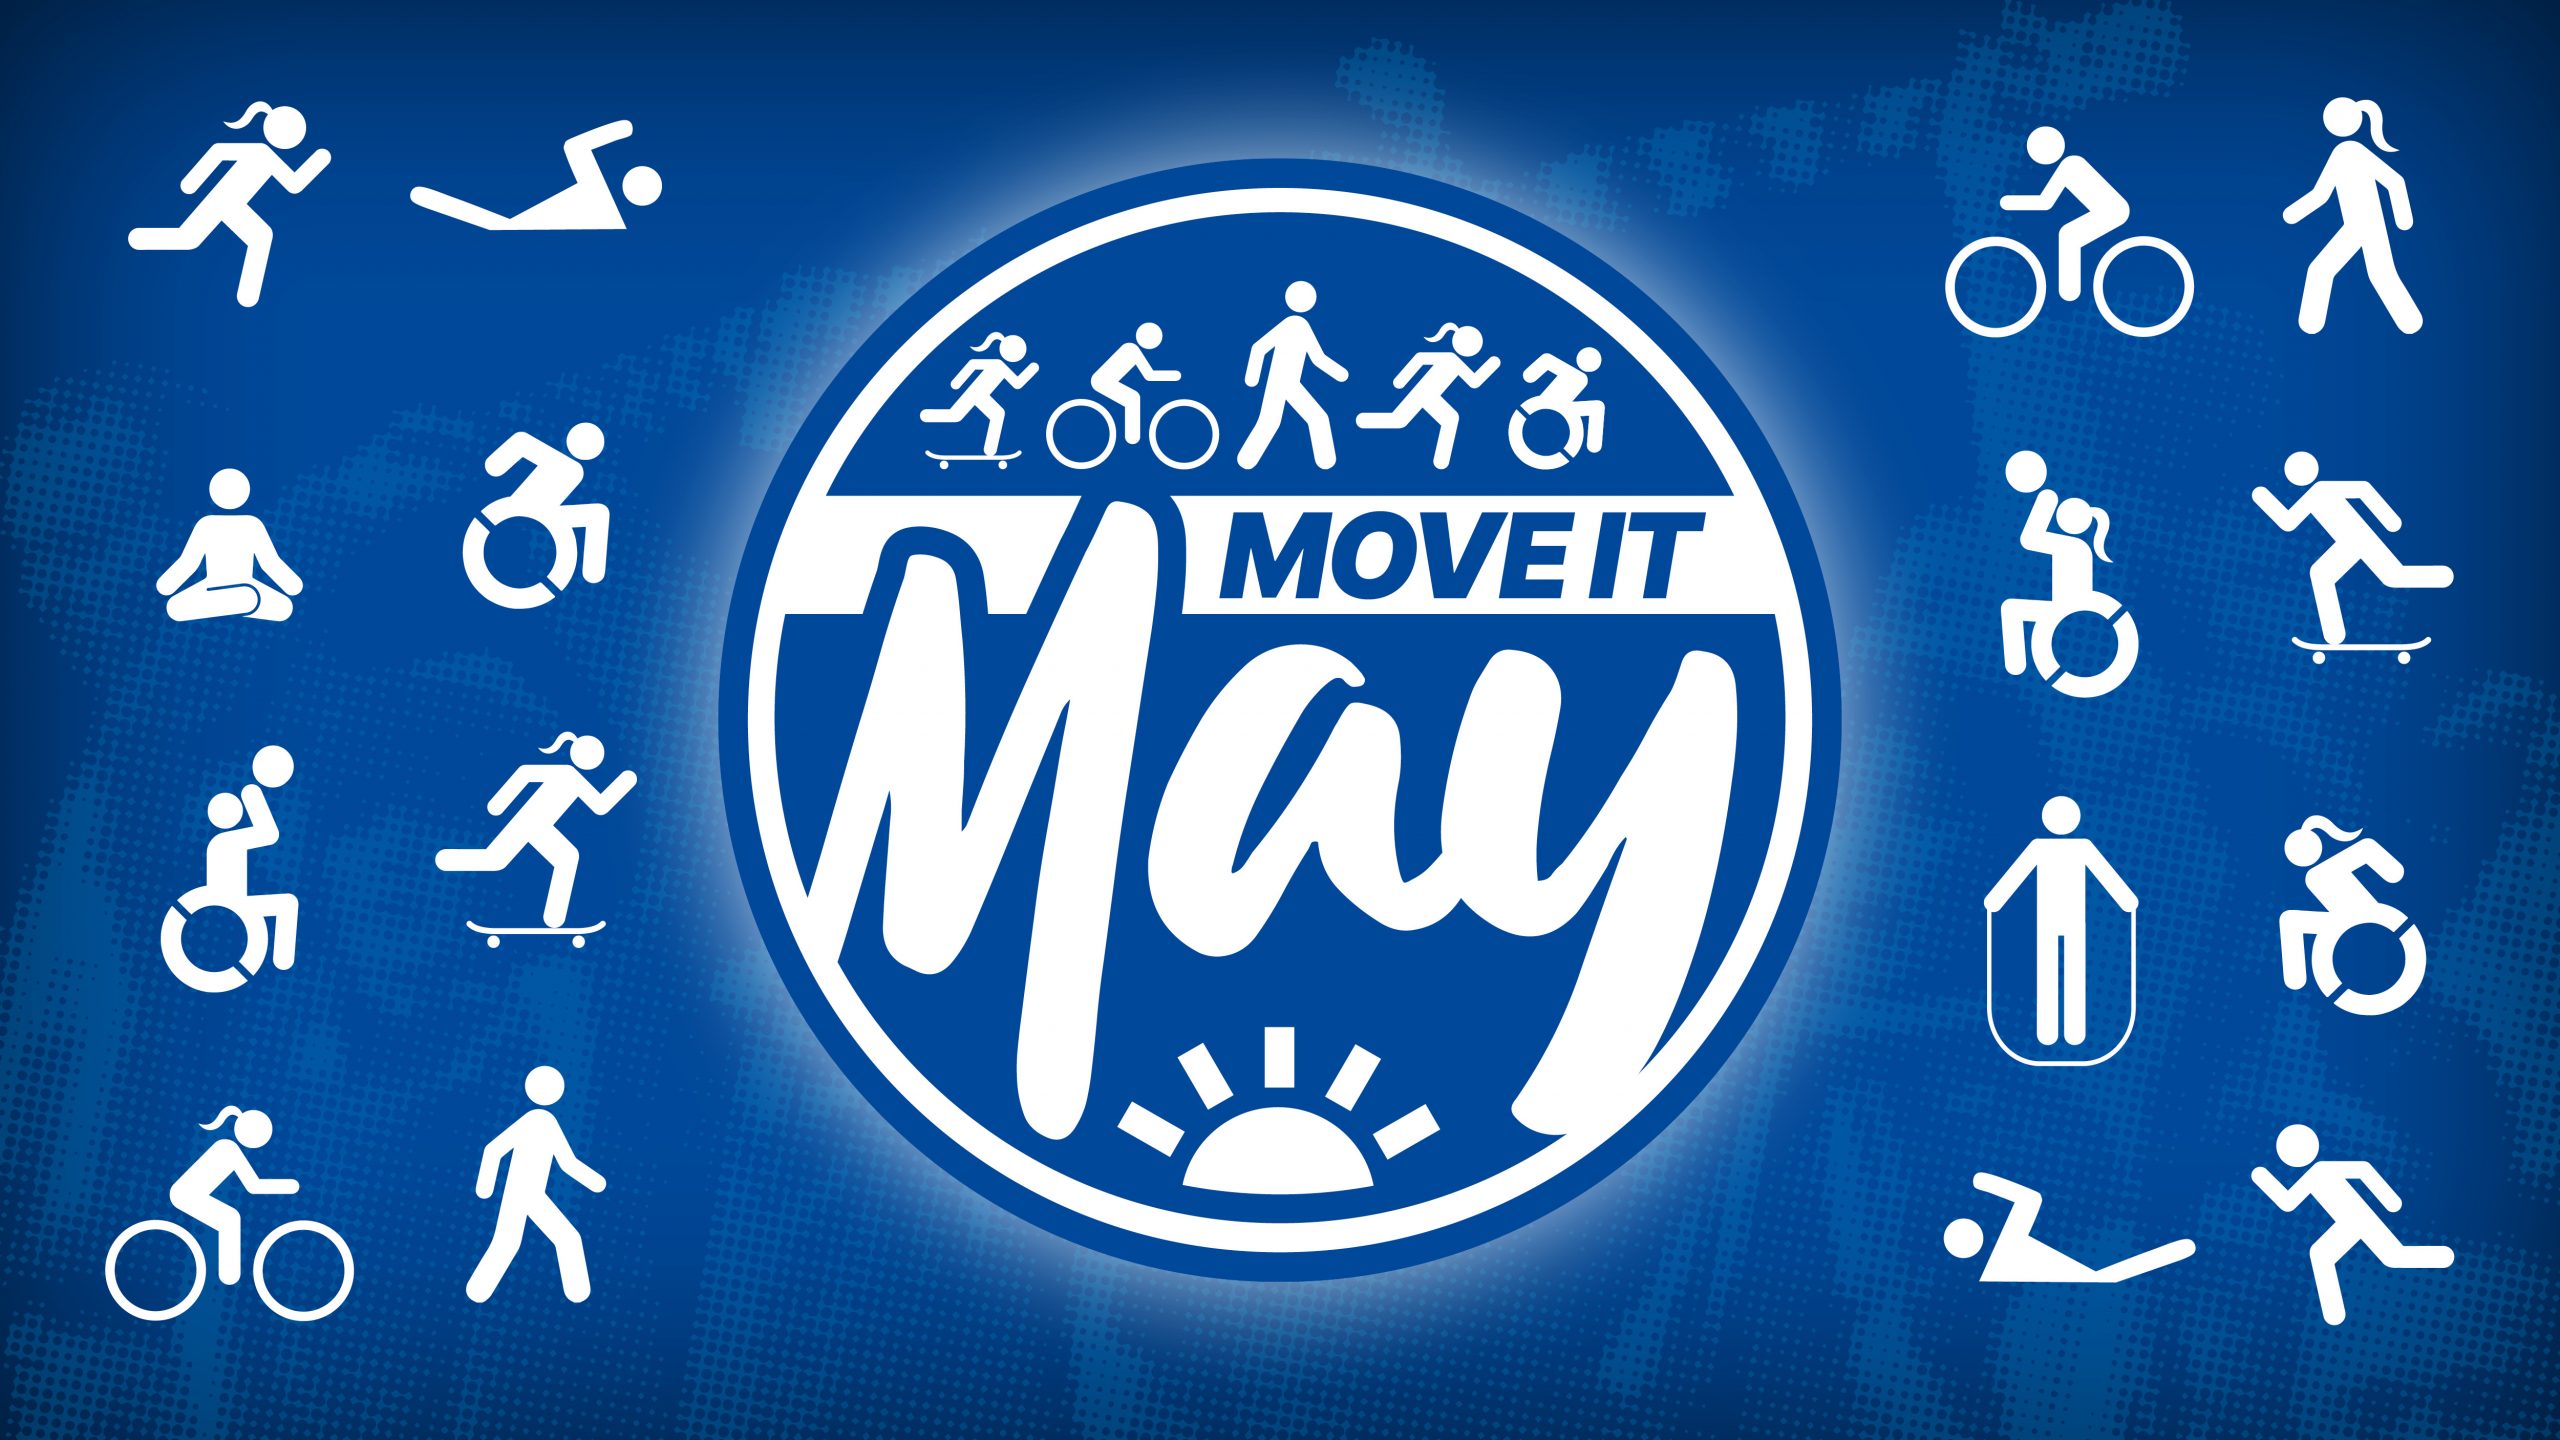 Will you take on our Move it May challenge?